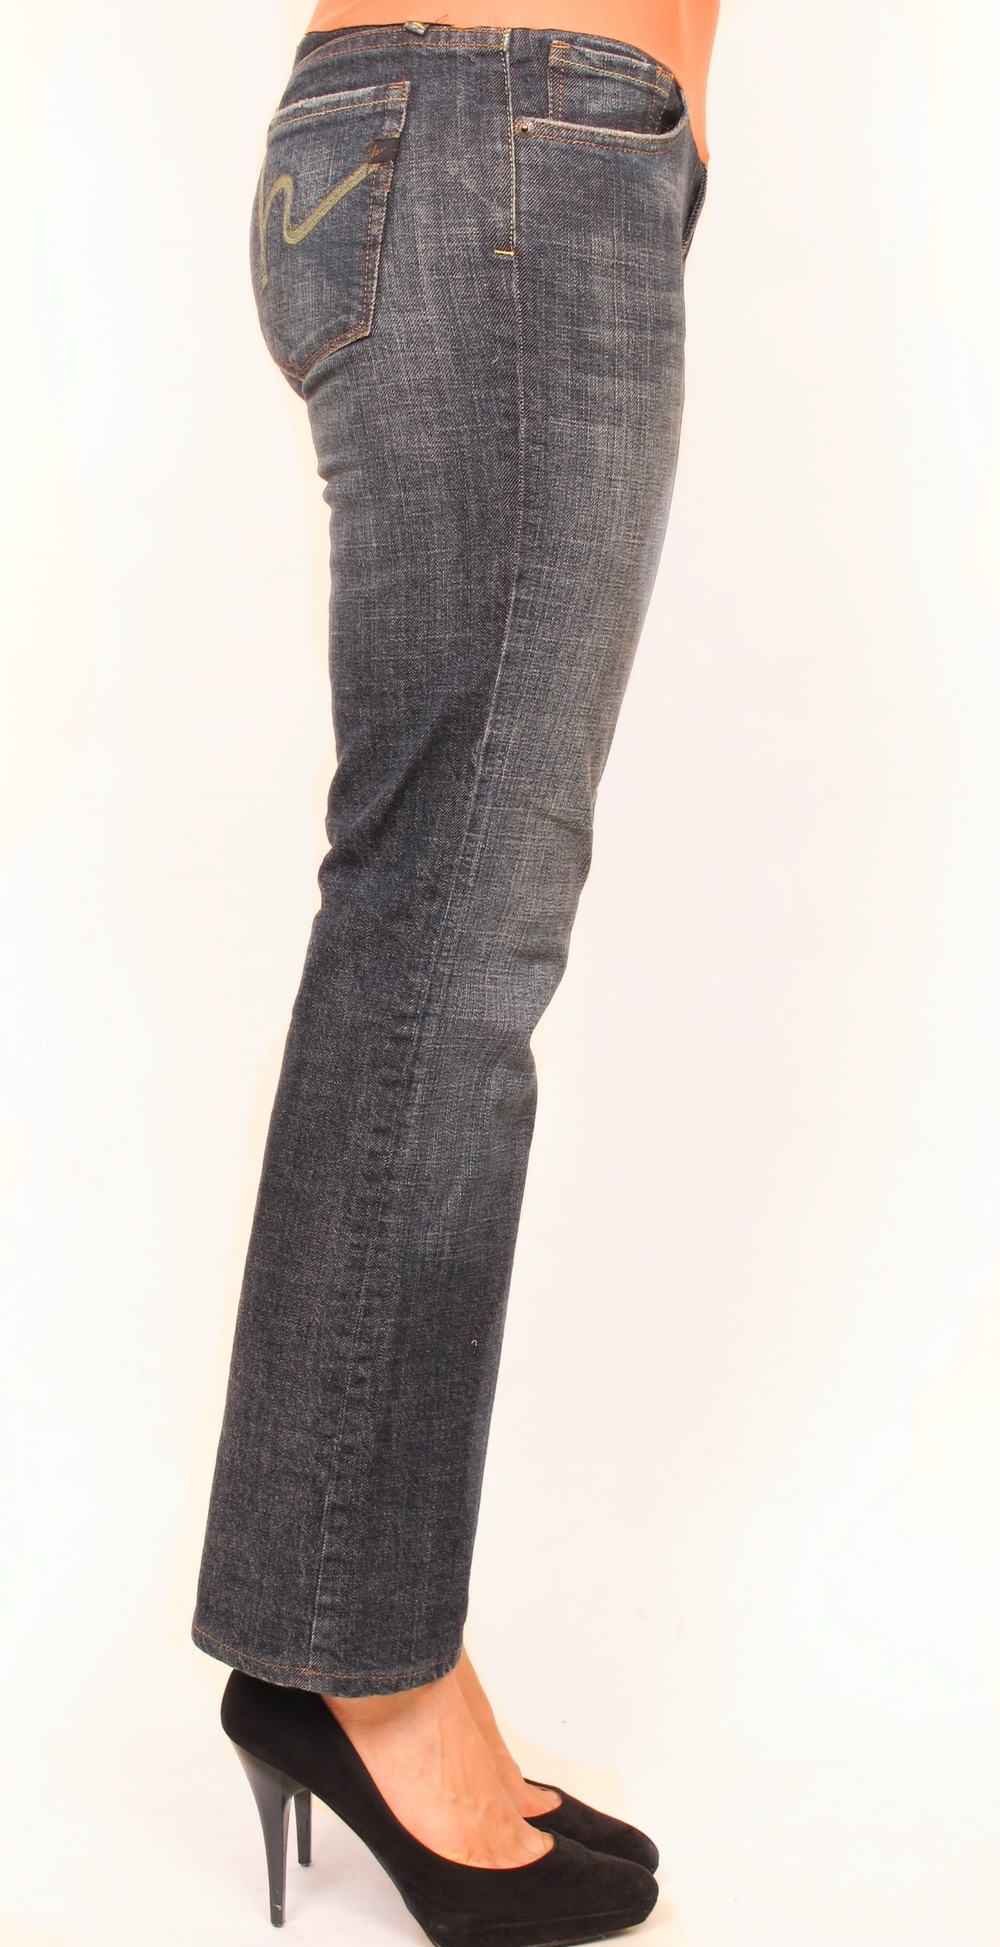 Citizen Of Humanity Bootcut Maternity Jeans 29 X 29 She Wolf